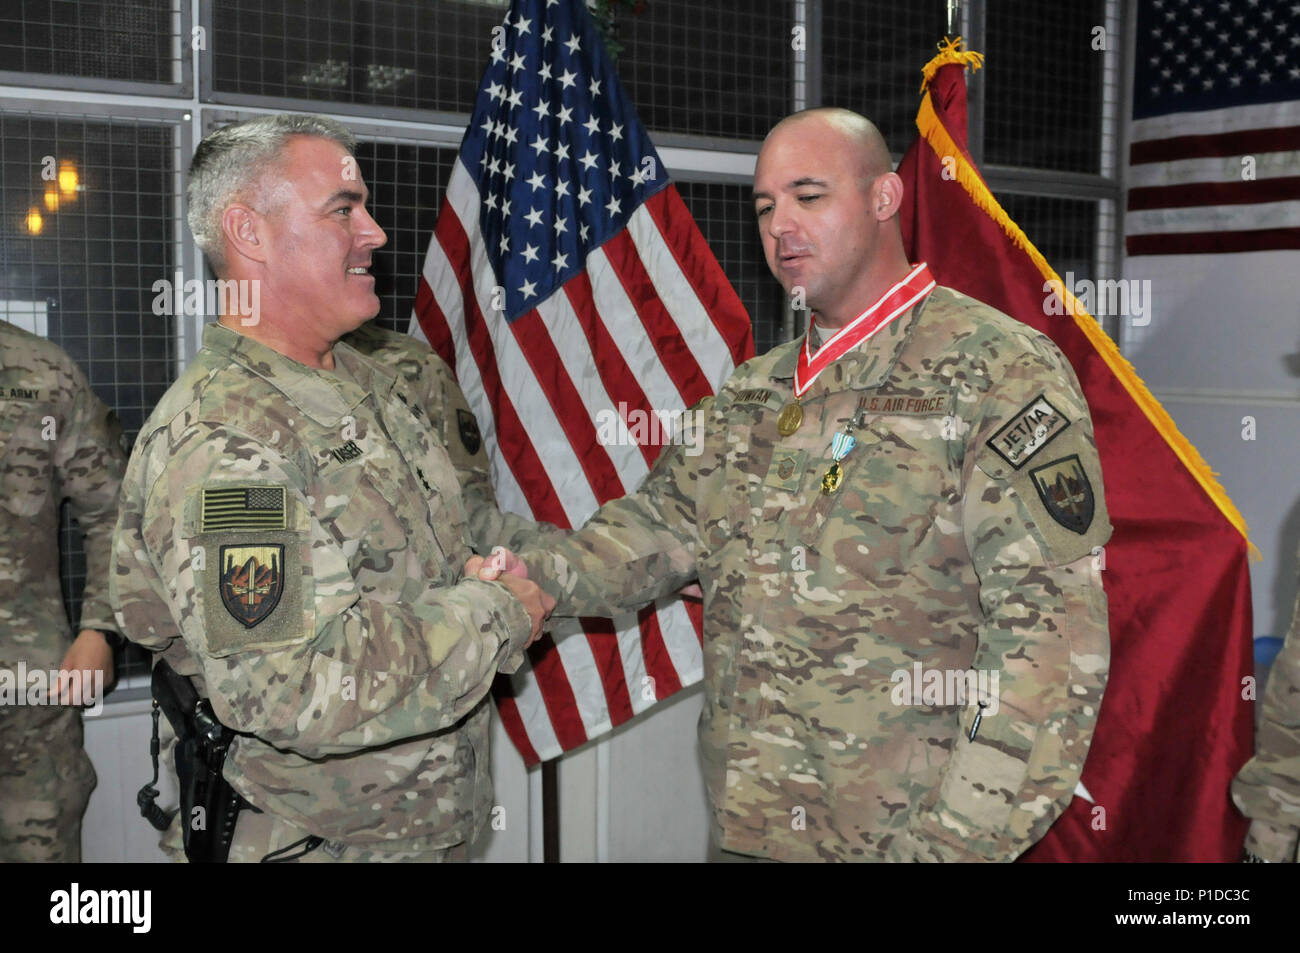 Master Sgt. Michael L. Bowman of Melbourne, Florida is congratulated by Maj. Gen. Richard G. Kaiser for being awarded the Bronze Order of the De Fleury Medal this week for his career achievements in training military engineers and service to Combined Joint Engineering directorate of Combined Security Transition Command - Afghanistan.  Kaiser, who is the Senior Engineer in theater, is also the commanding general of CSTC-A    The De Fleury Medal, an award of the US Army Engineer Association, was named in honor of François-Louis Teissèdre de Fleury, a French Engineer in the Continental Army durin Stock Photo